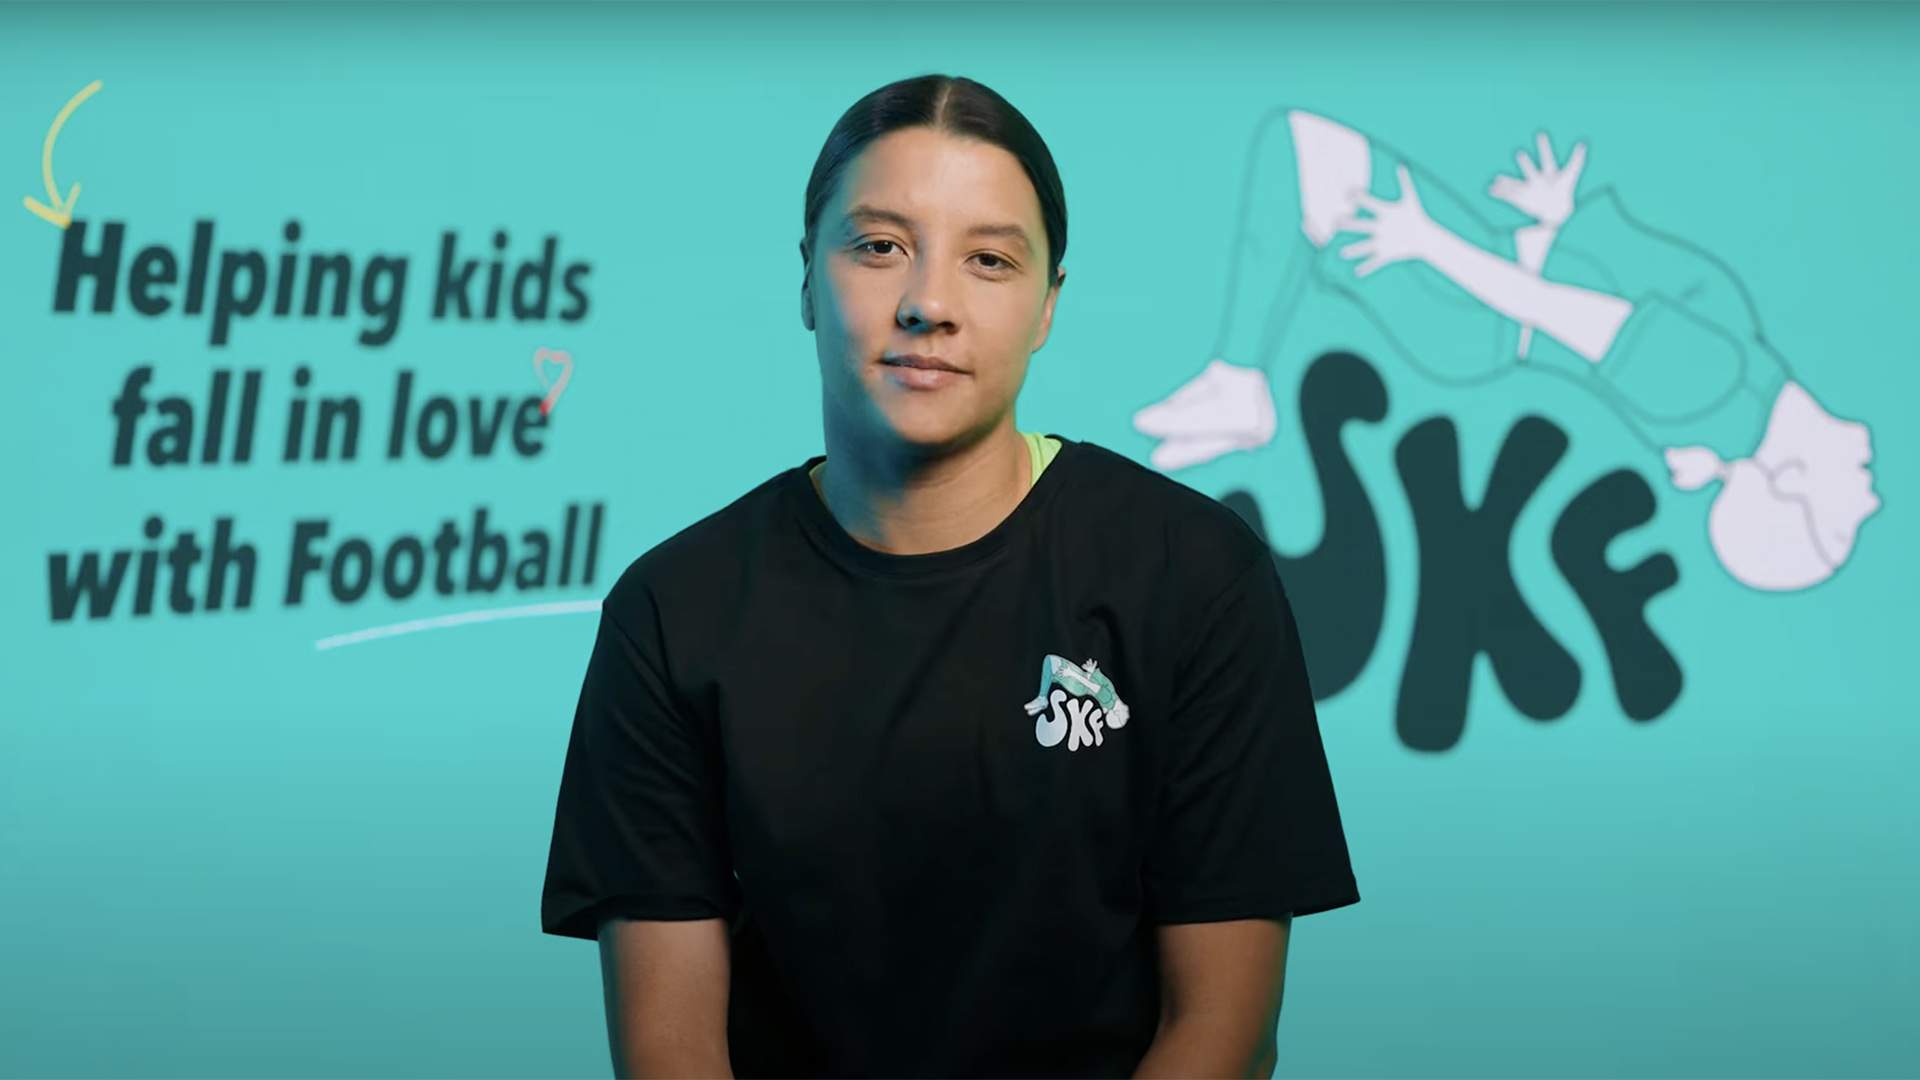 Sam Kerr Is Launching a Football School for Kids Because Everyone Wants to Be the Soccer Star Right Now